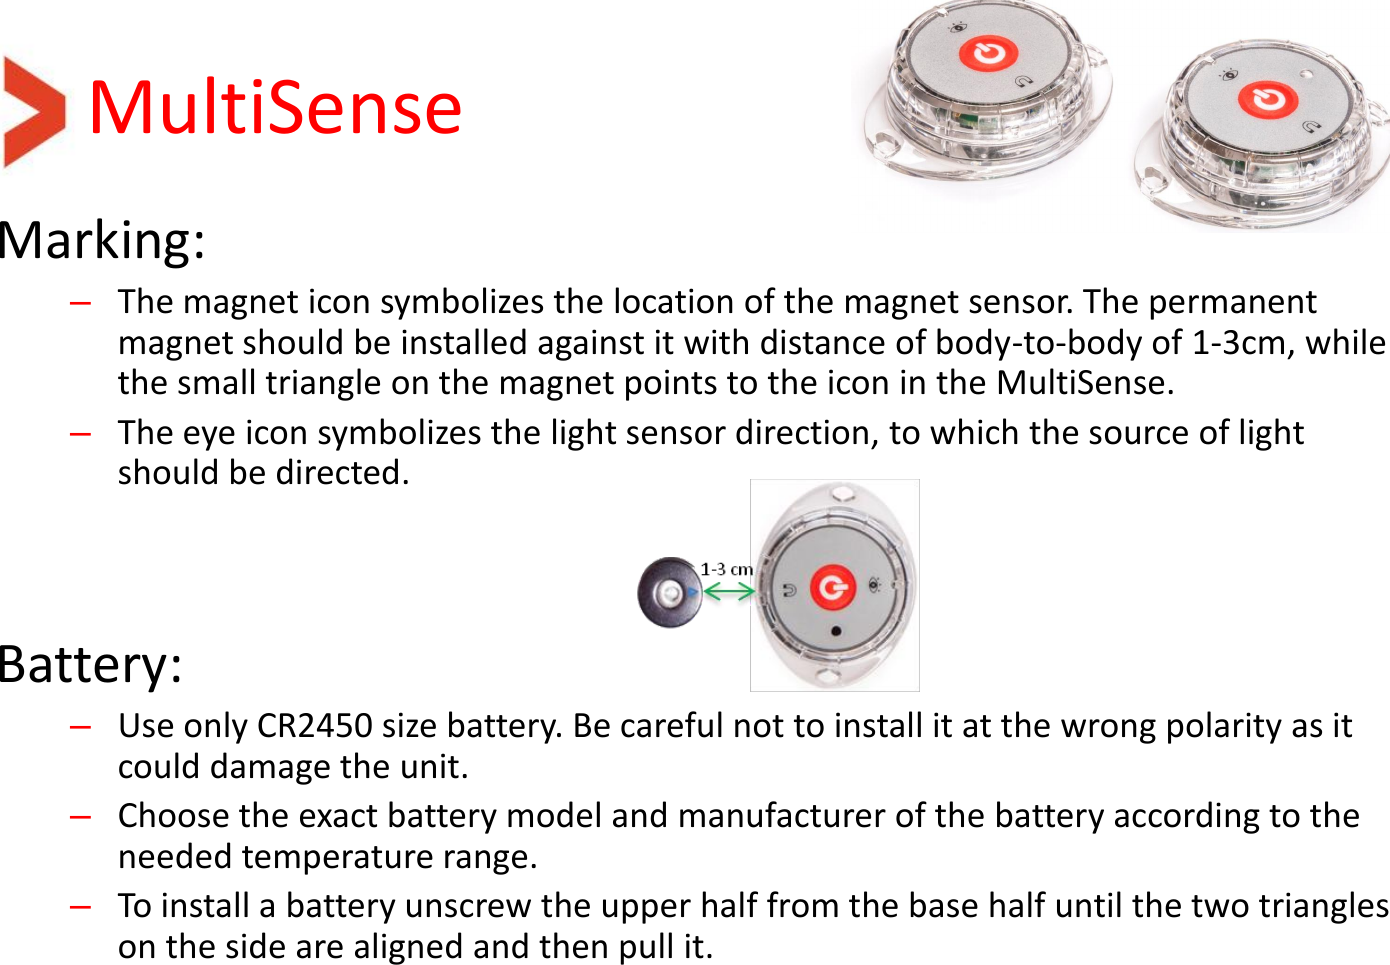 MultiSense Marking: –The magnet icon symbolizes the location of the magnet sensor. The permanent magnet should be installed against it with distance of body-to-body of 1-3cm, while the small triangle on the magnet points to the icon in the MultiSense. –The eye icon symbolizes the light sensor direction, to which the source of light should be directed.   Battery: –Use only CR2450 size battery. Be careful not to install it at the wrong polarity as it could damage the unit. –Choose the exact battery model and manufacturer of the battery according to the needed temperature range. –To install a battery unscrew the upper half from the base half until the two triangles on the side are aligned and then pull it. 